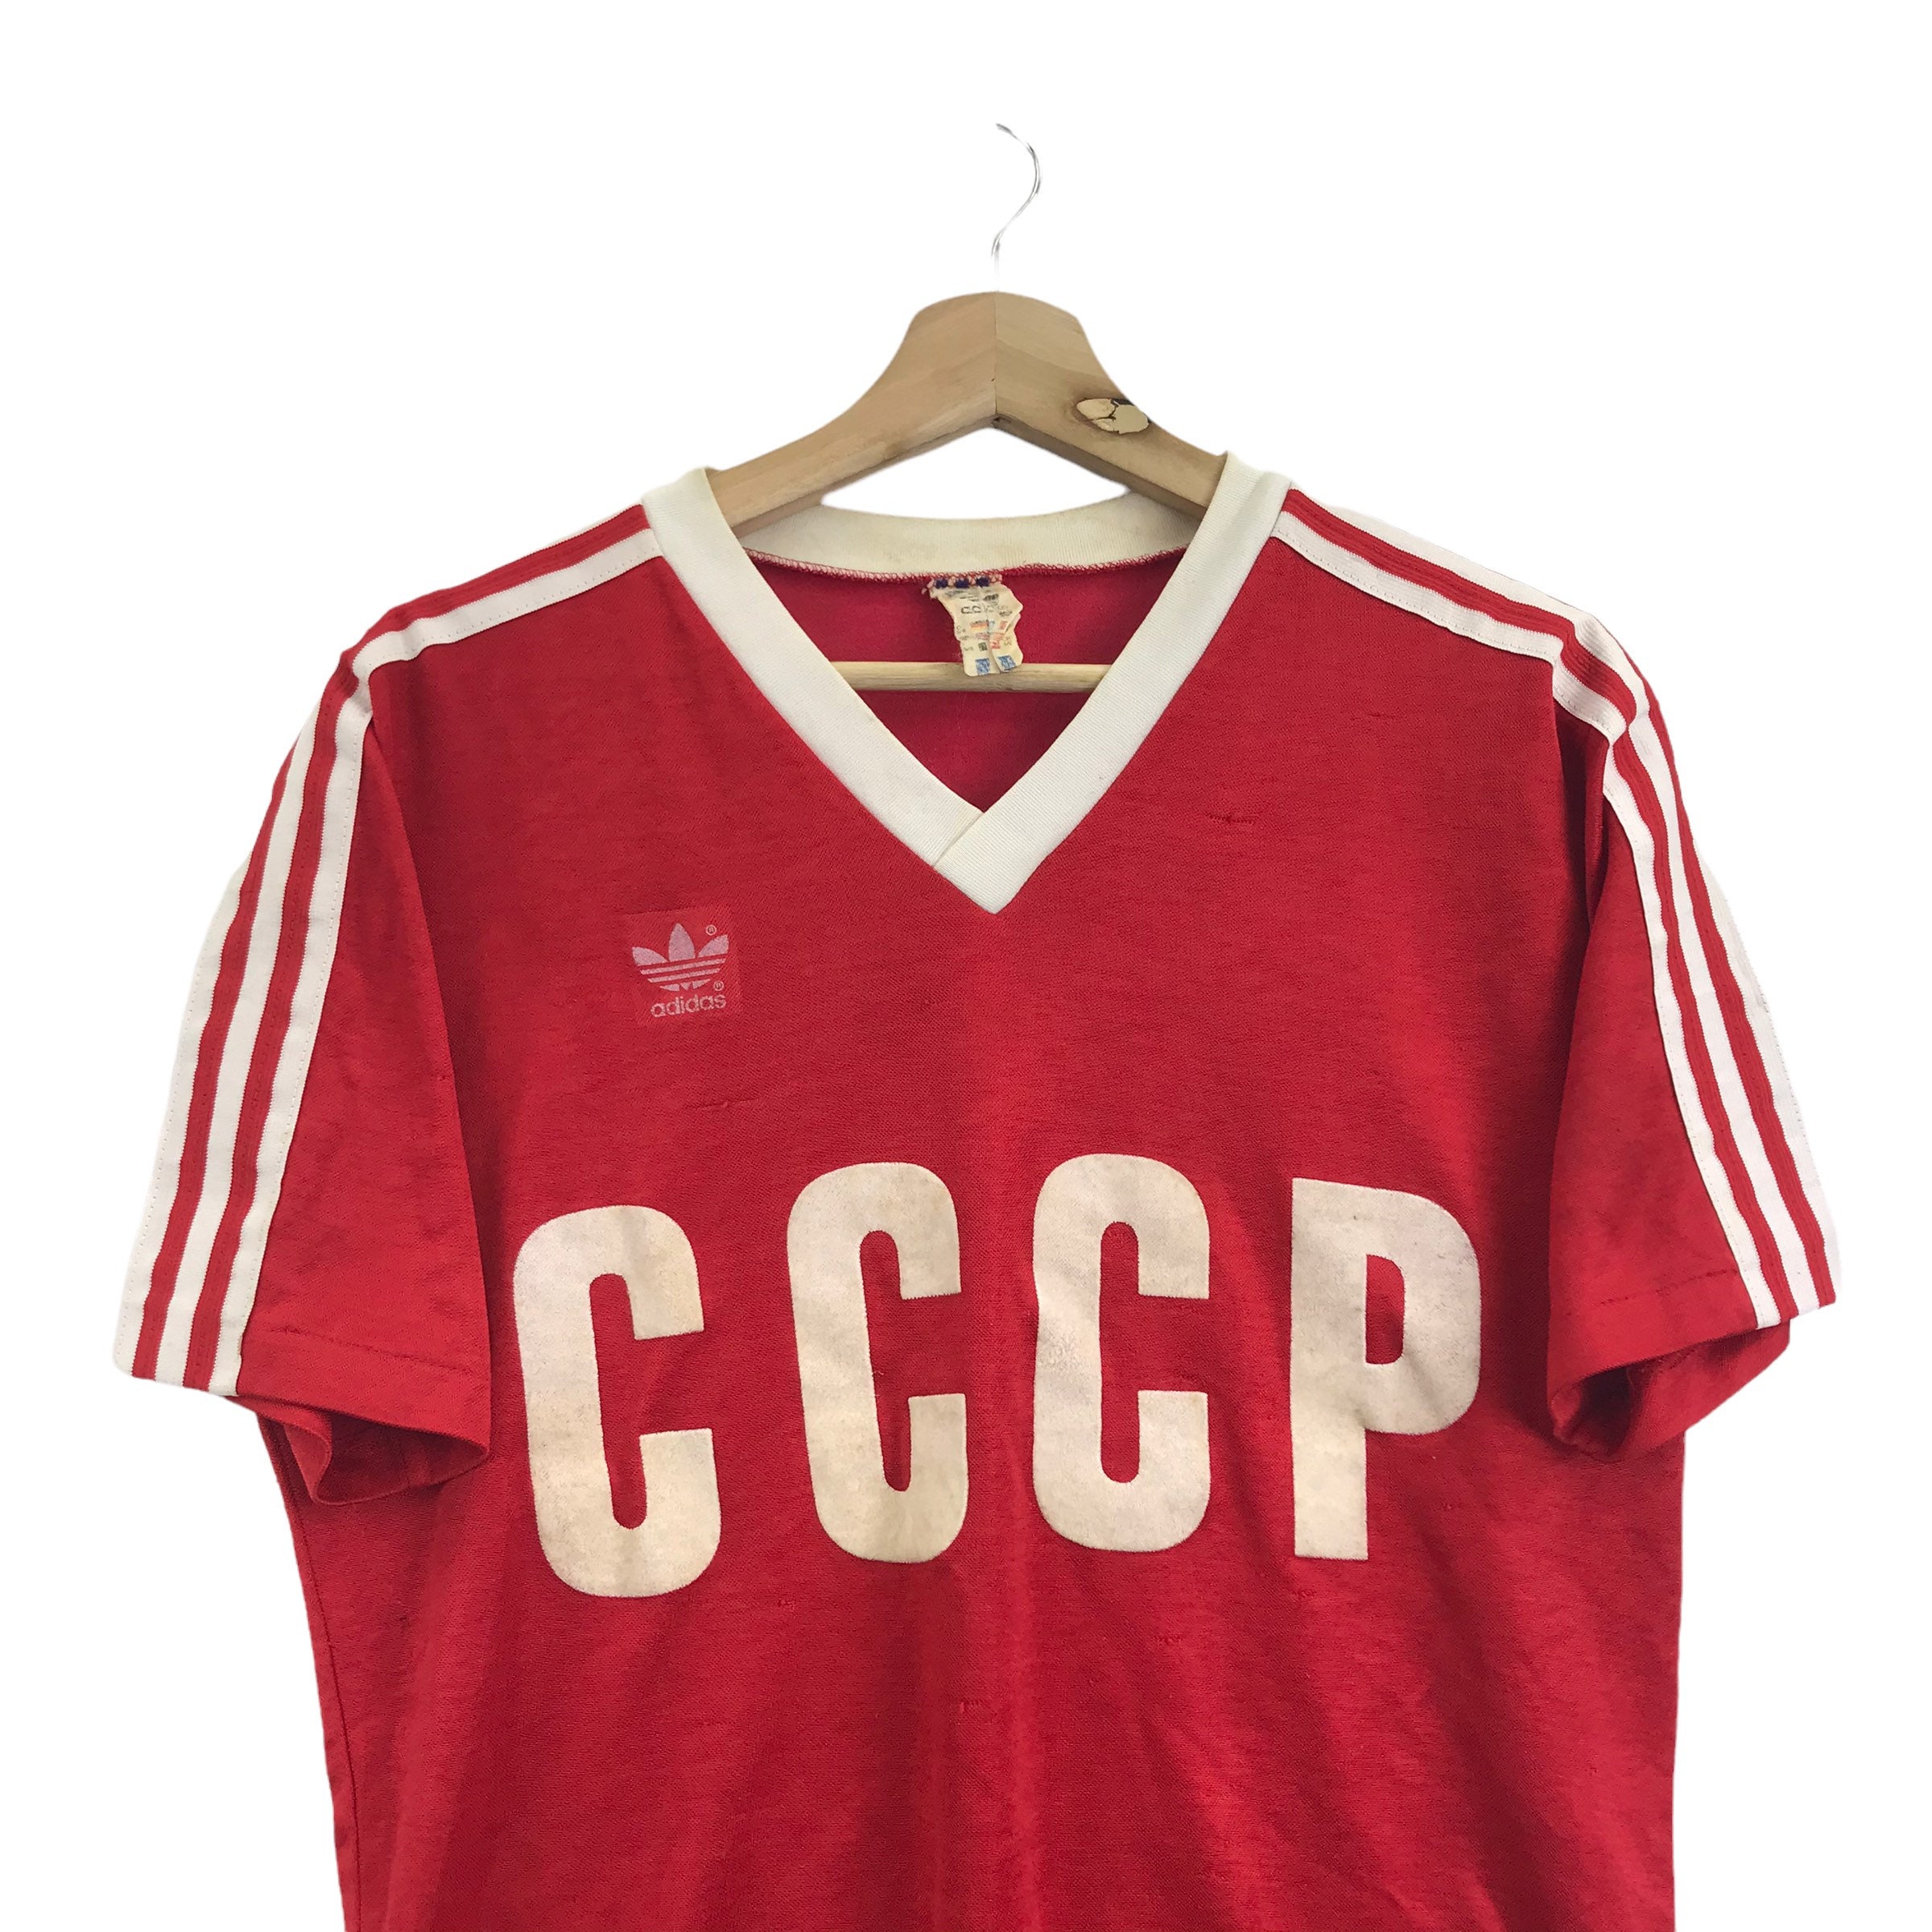 Vintage 80s ADIDAS CCCP RUSSIA Ussr Home Football Red T Shirt - Etsy Finland